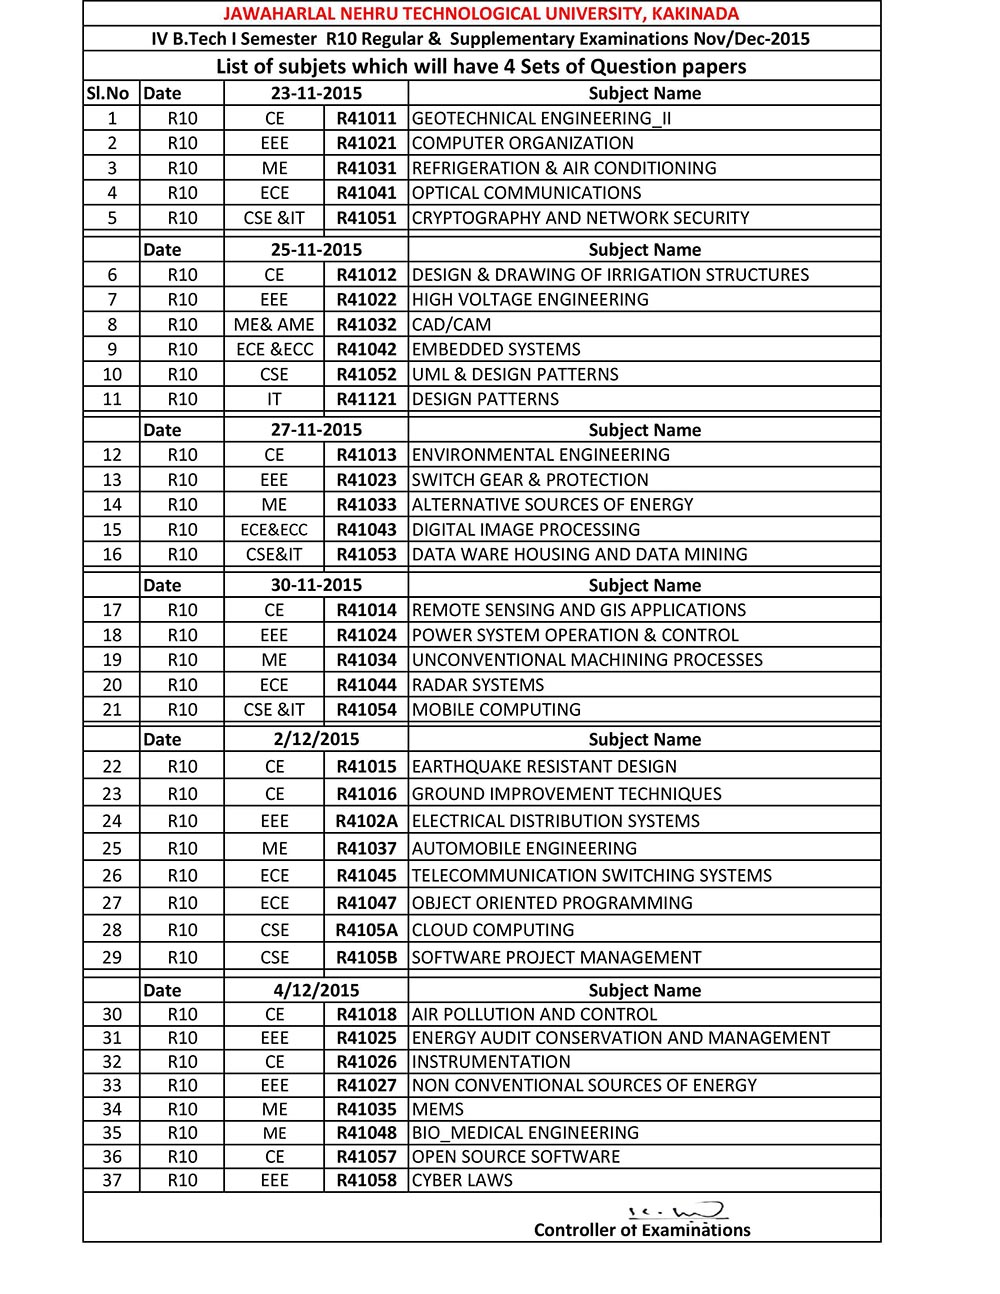 JNTUK 4-1 B.Tech List of Subjects which will have 4 Sets of Q.P